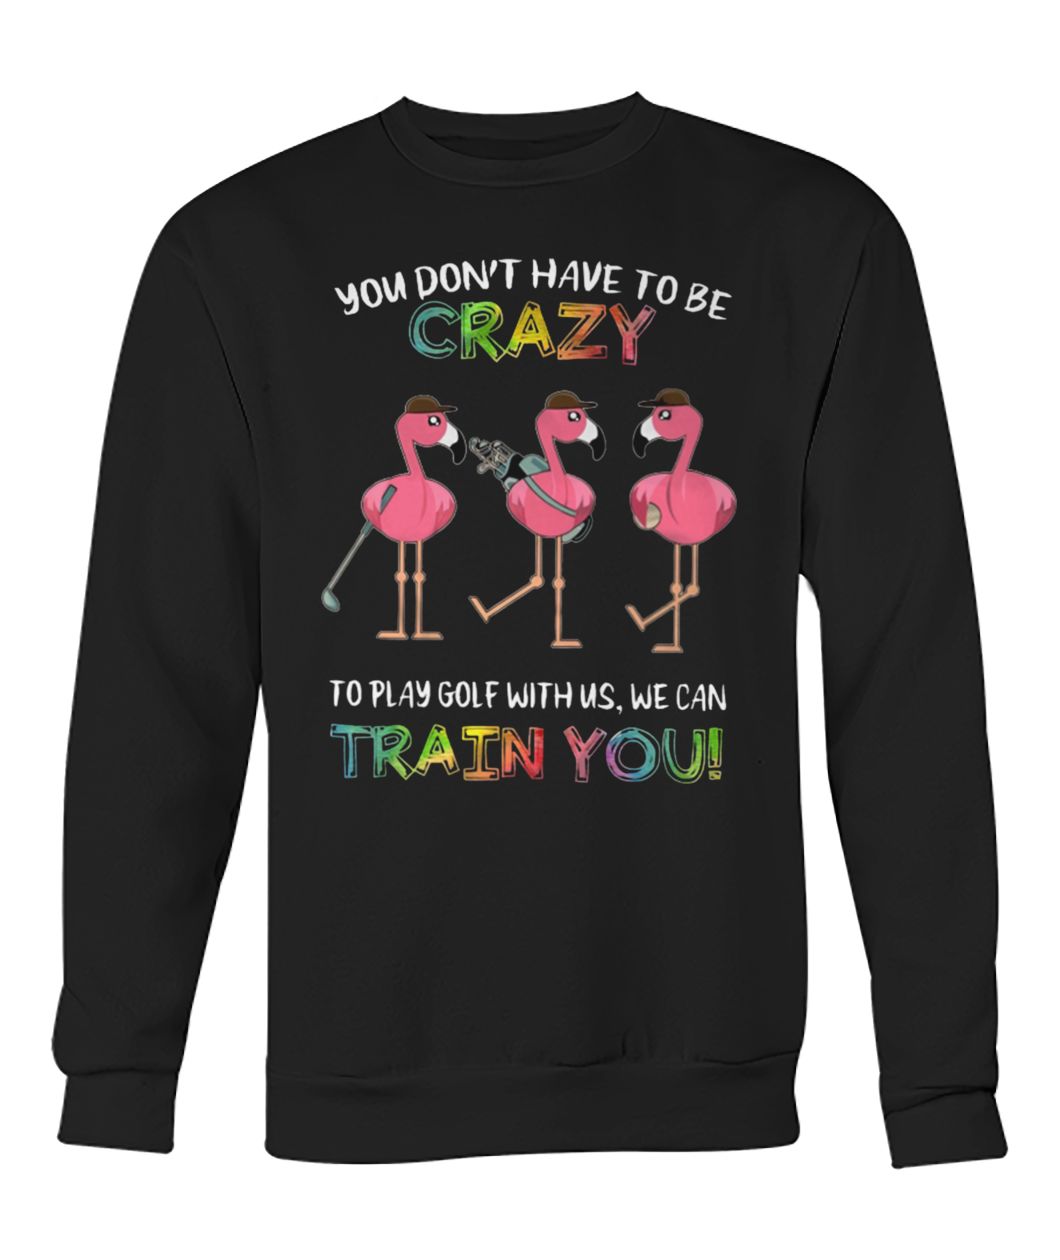 Flamingo you don’t have to be crazy to play golf with us we can train you crew neck sweatshirt